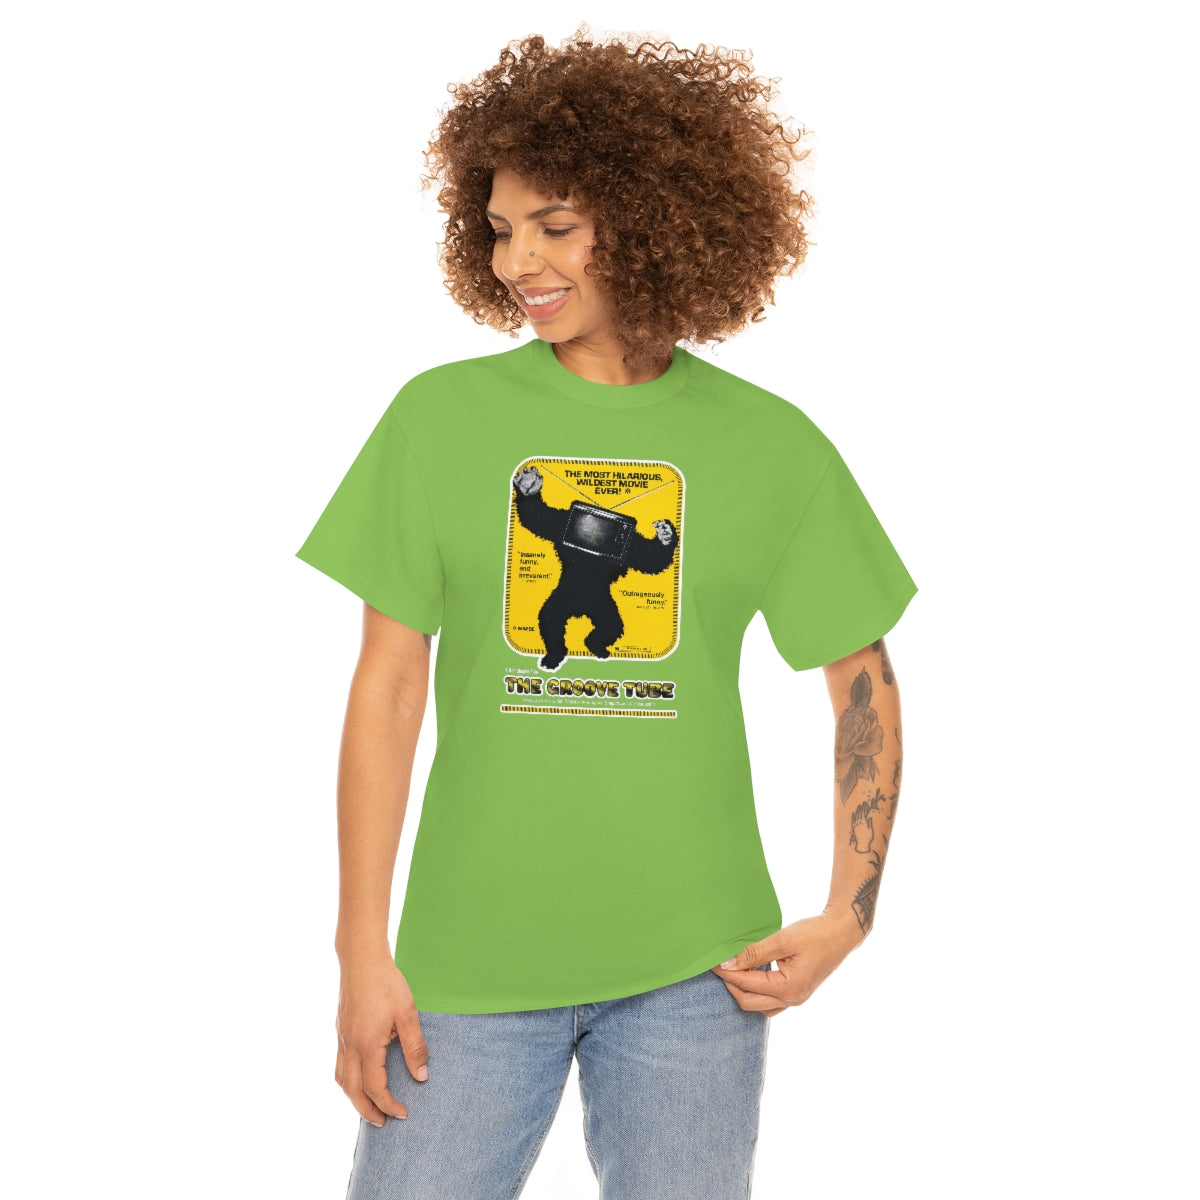 The Groove Tube T-Shirt